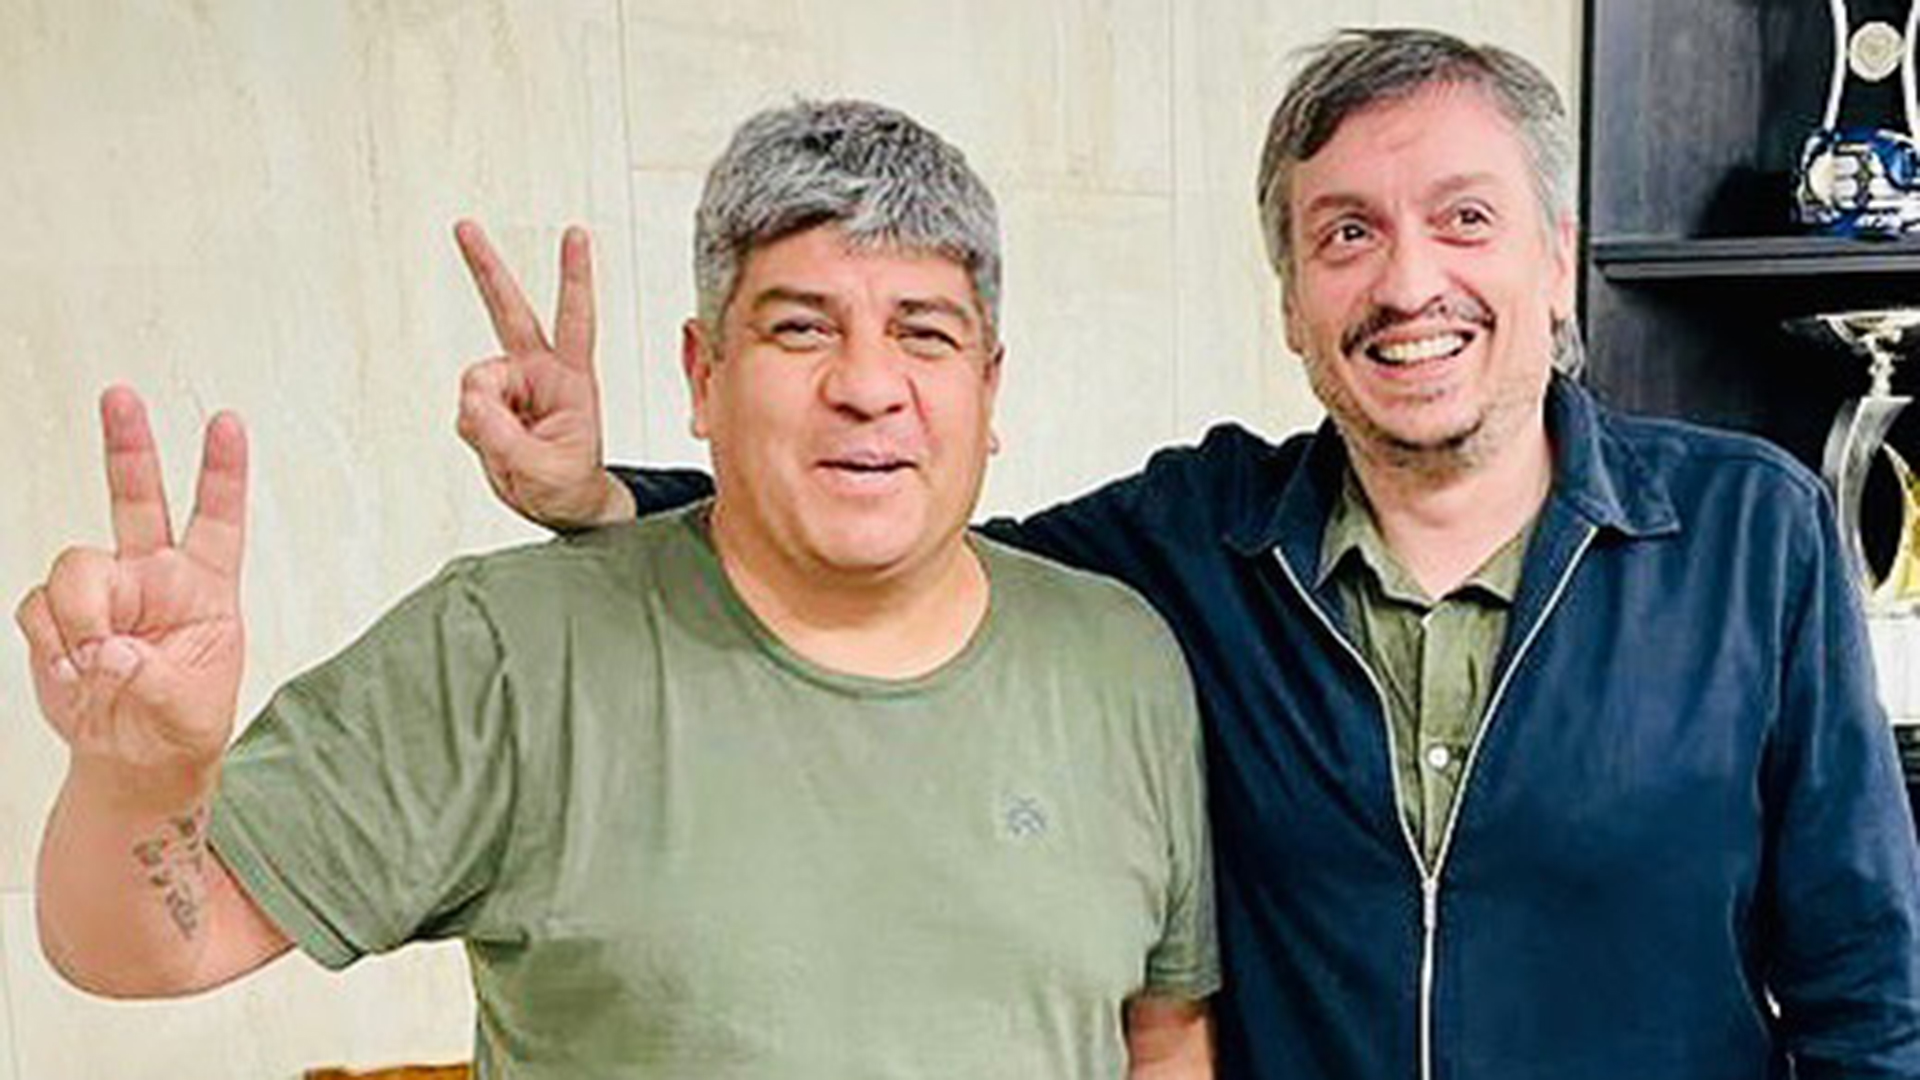 Pablo Moyano joined Maximo Kirchner during a visit to the last week 